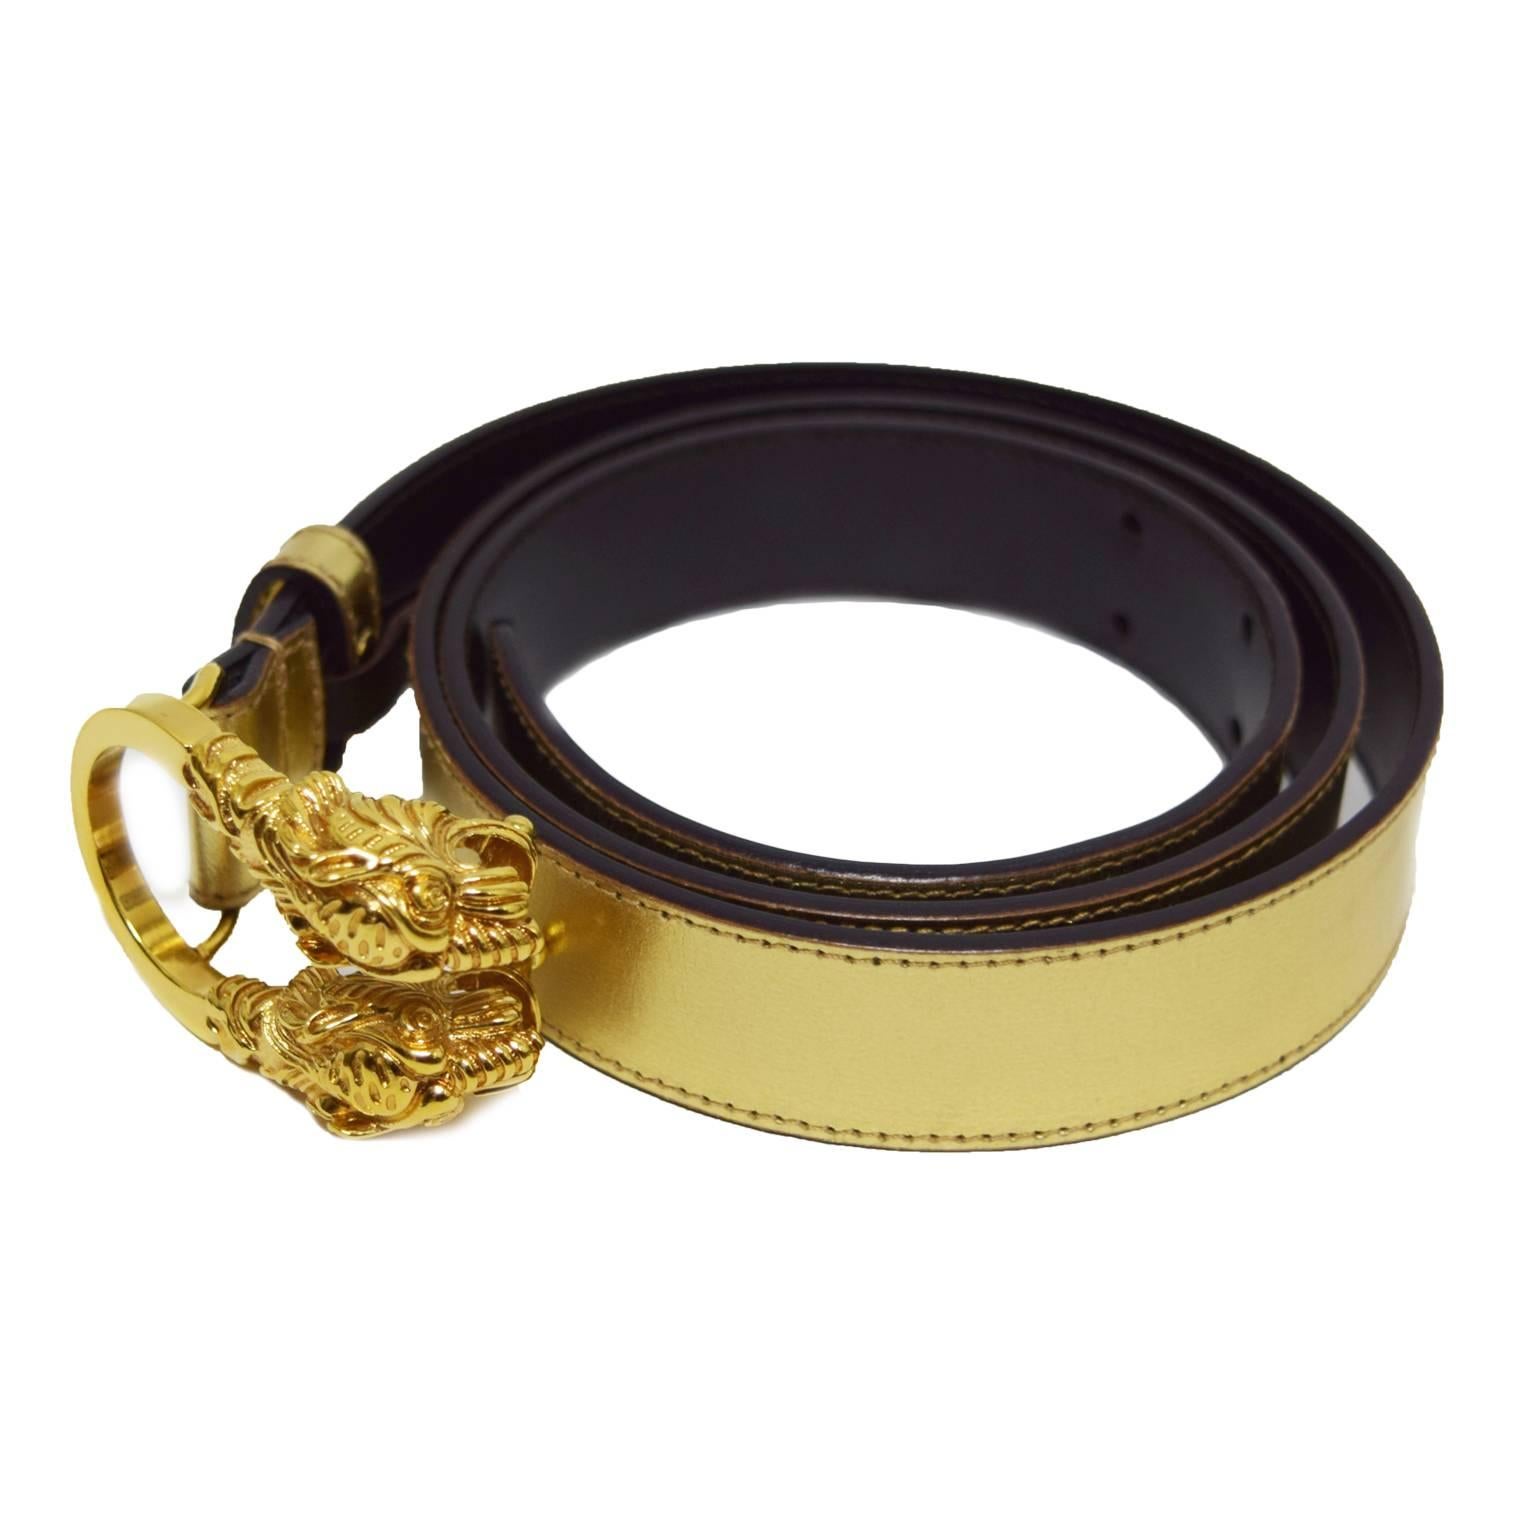 This Gucci belt is gold coated dark brown leather with gilt double headed lion buckle.

